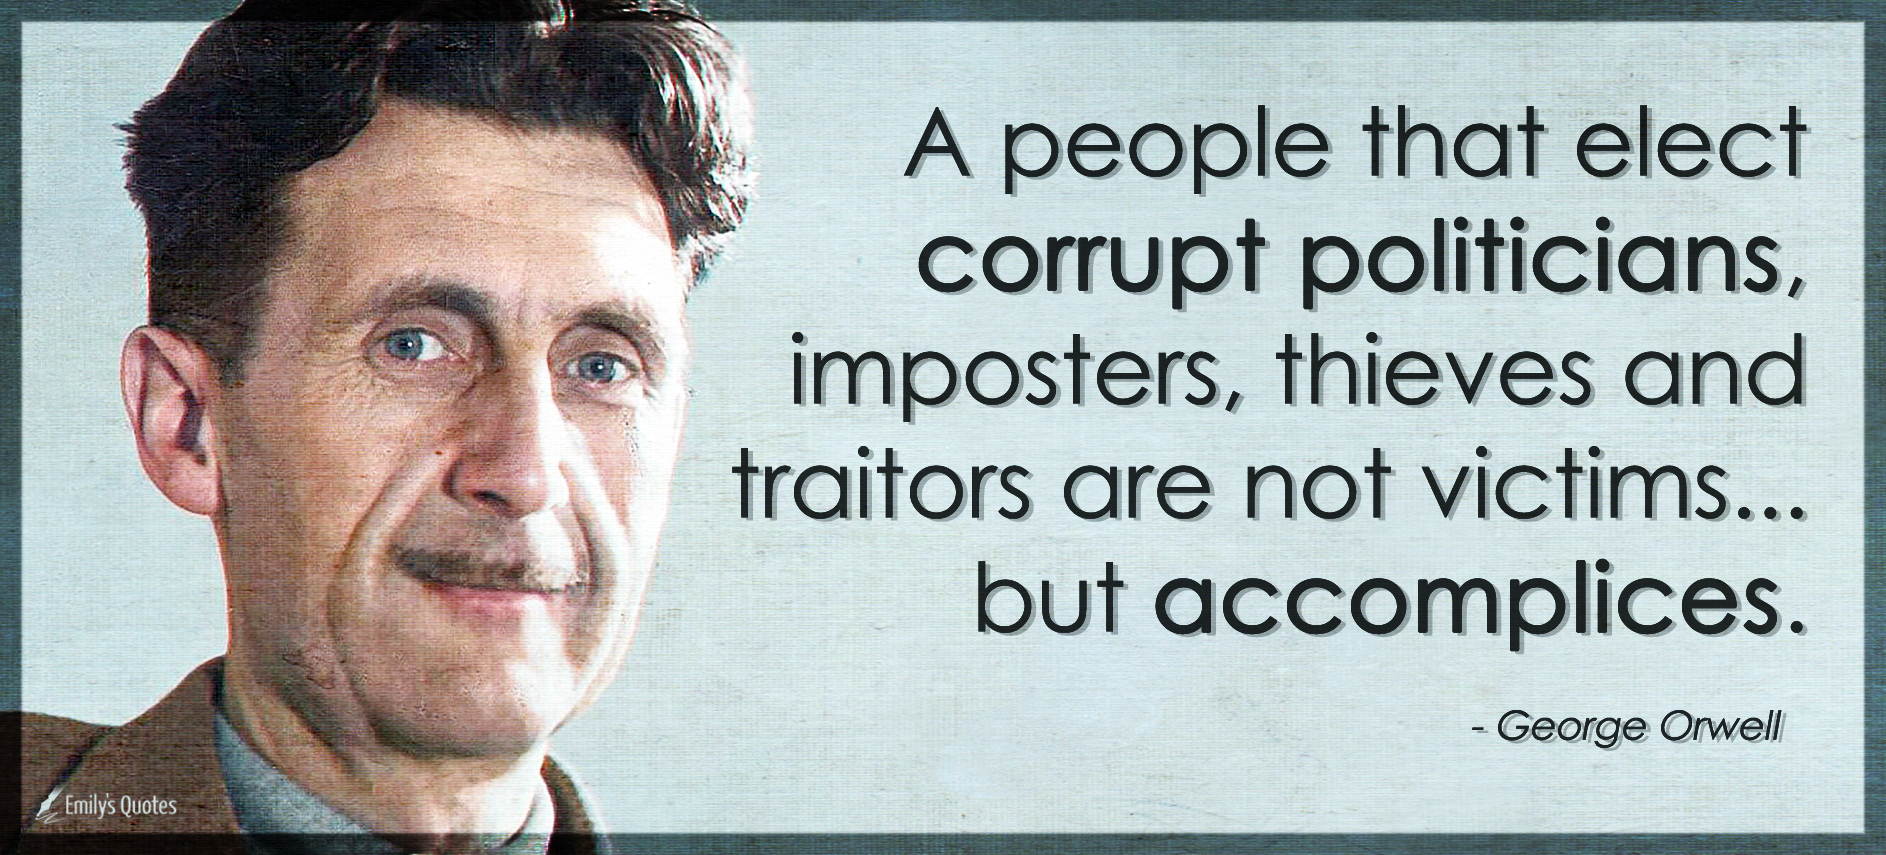 A people that elect corrupt politicians, imposters, thieves and